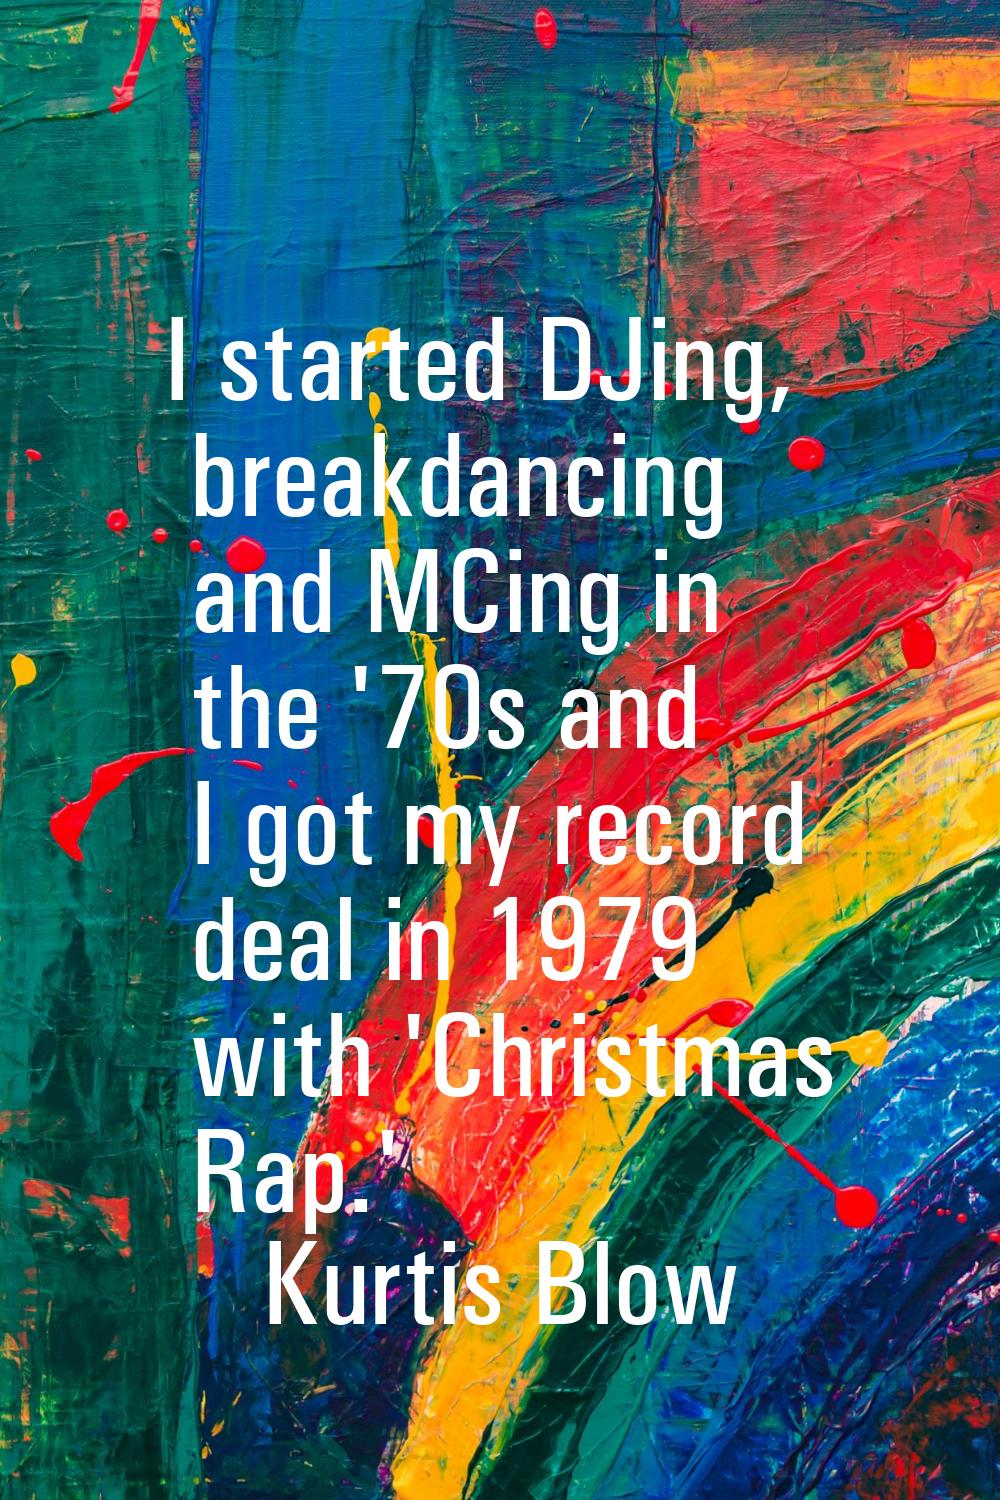 I started DJing, breakdancing and MCing in the '70s and I got my record deal in 1979 with 'Christma